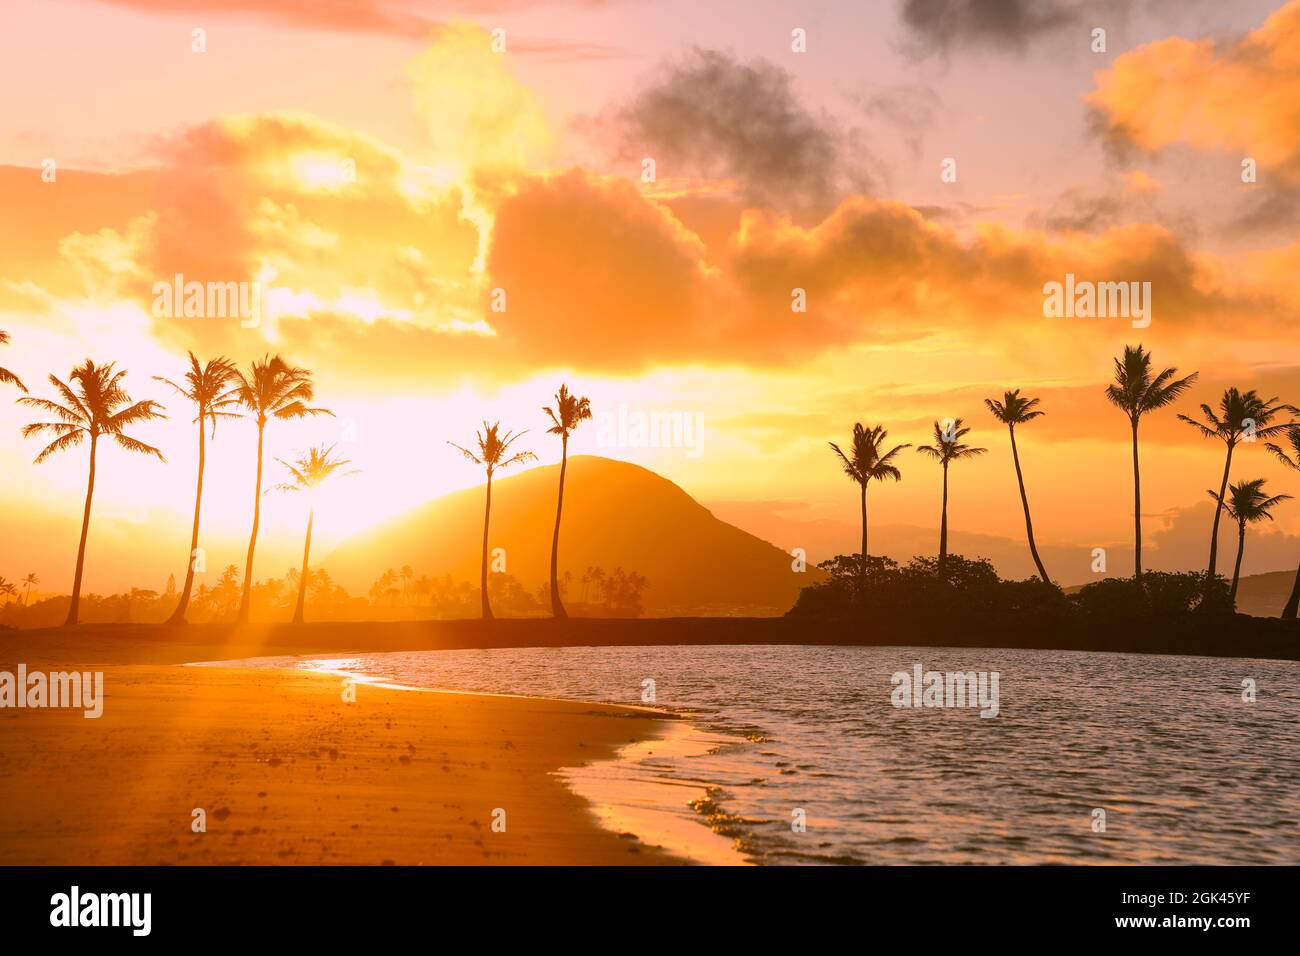 Beautiful view of a beach with high palm trees and a sunrise 